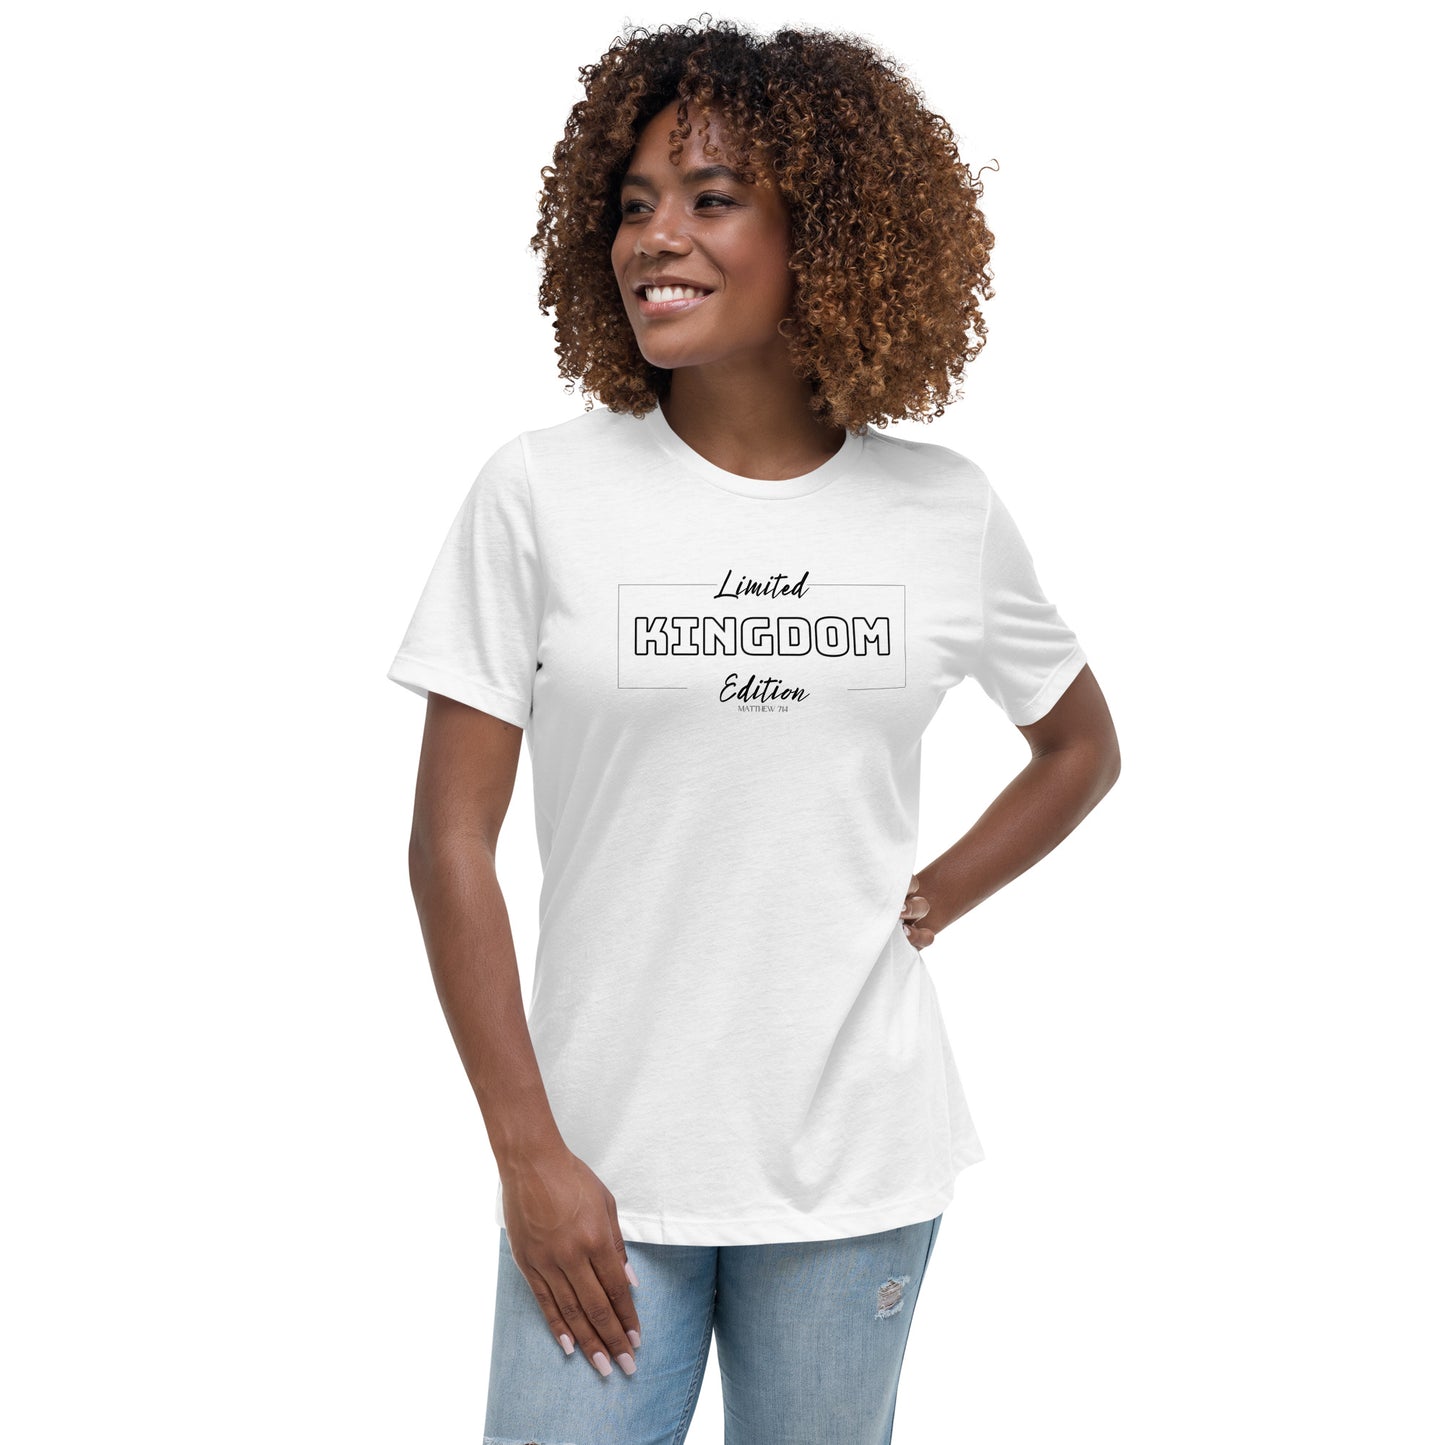 Limited KINGDOM Edition Matthew 7:14 Women's Relaxed T-Shirt